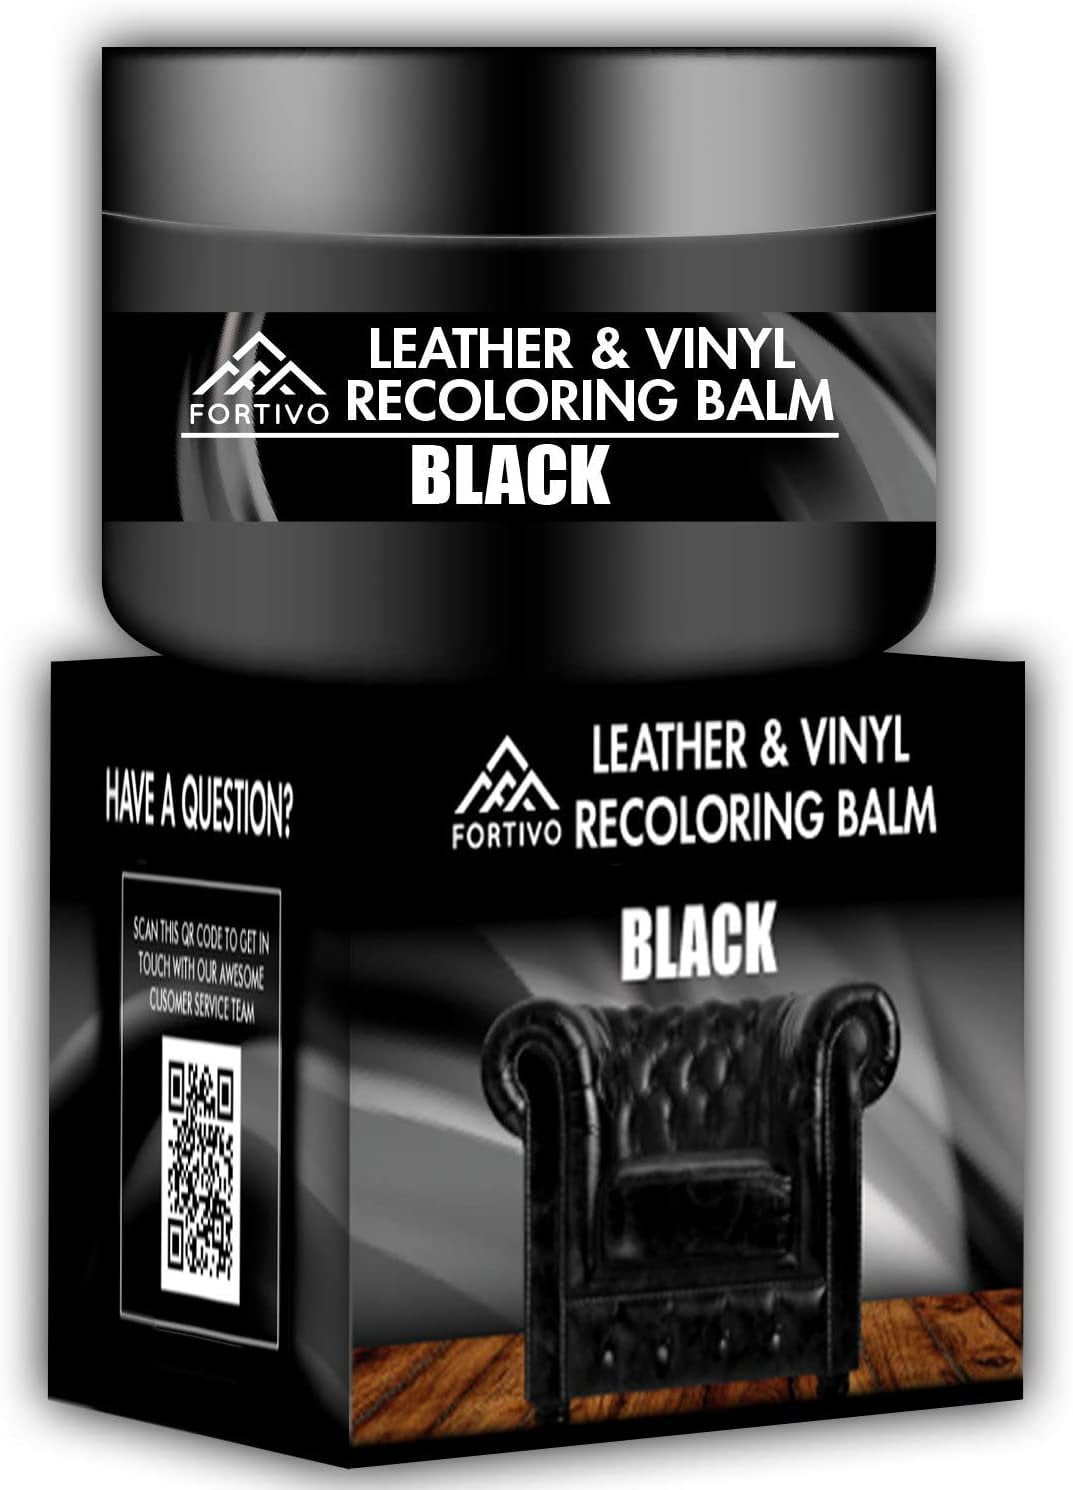  drtulz Black Leather Recoloring Balm, Leather Color Restorer  Conditioner, Leather Repair Kits for Vinyl Furniture, Sofa, Car Seats,  Shoes - Repair Leather Color on Faded & Scratched Leather Couches :  Automotive